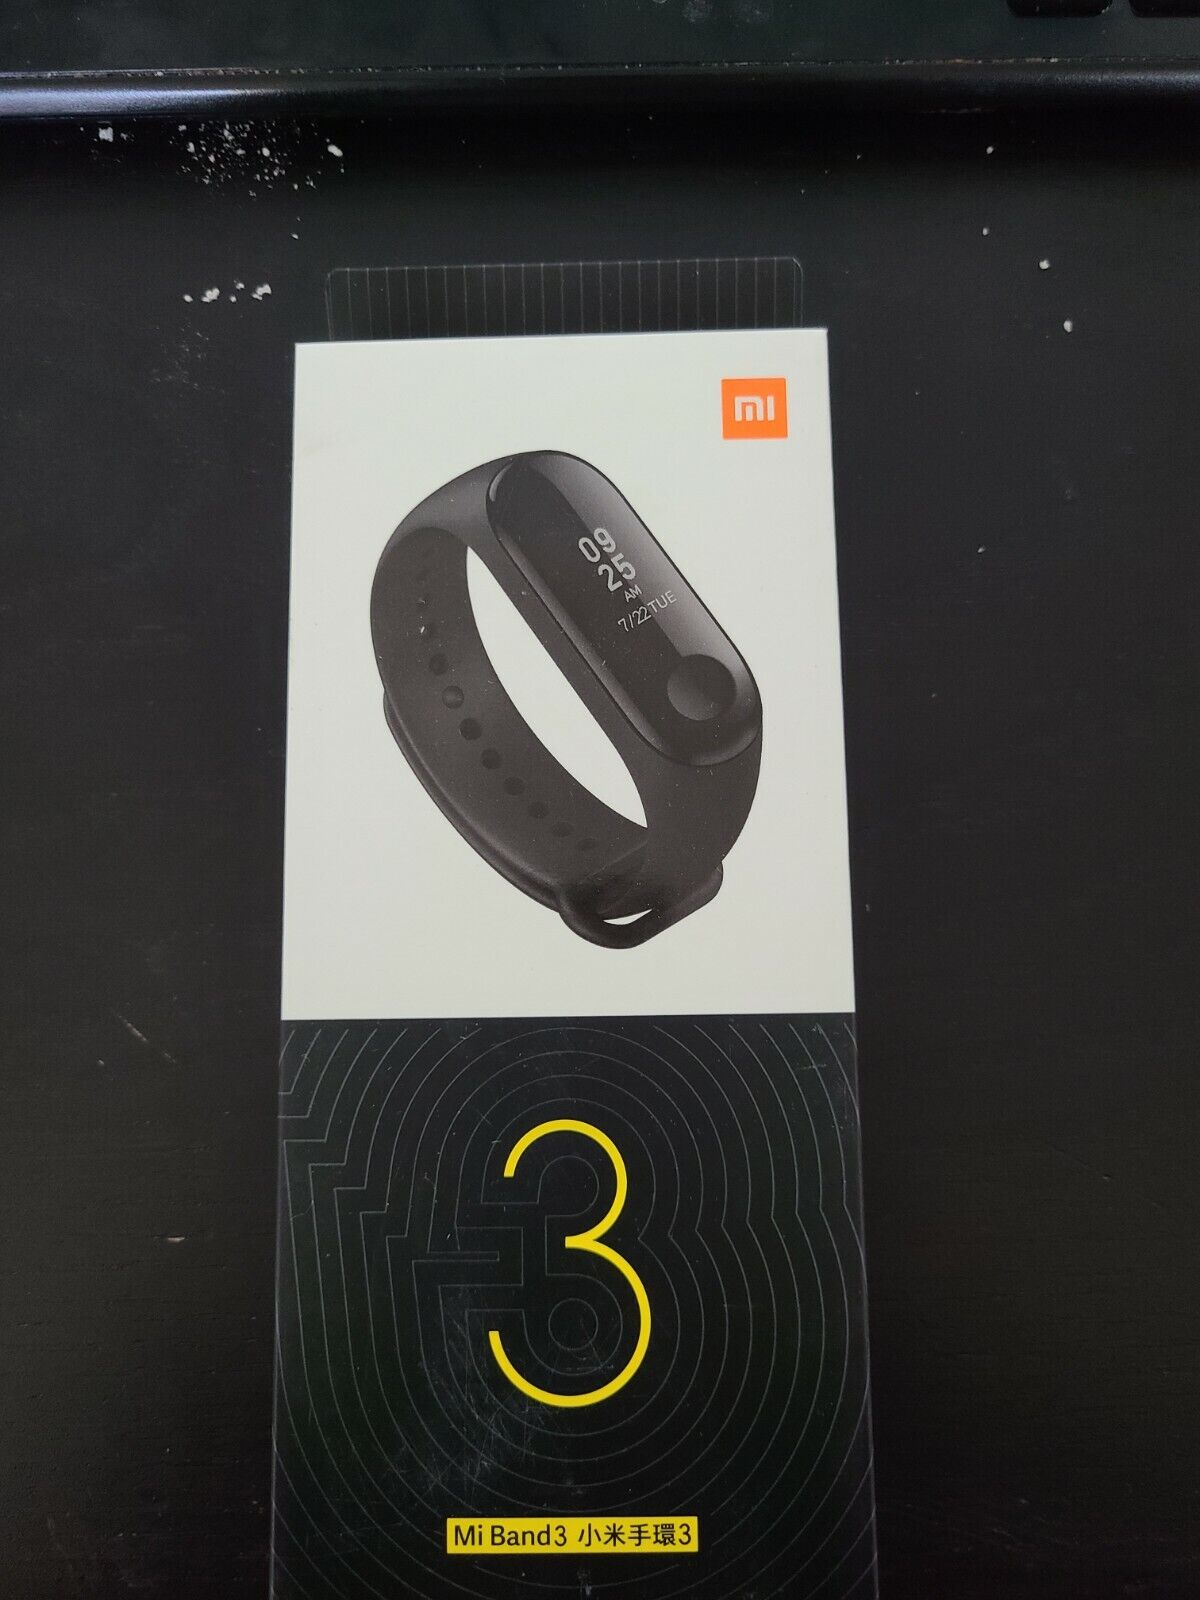 Bundle of 5 Xiaomi Mi Band 3 Smart Wristband Watch OLED Touch Screen Xiaomi Does Not Apply